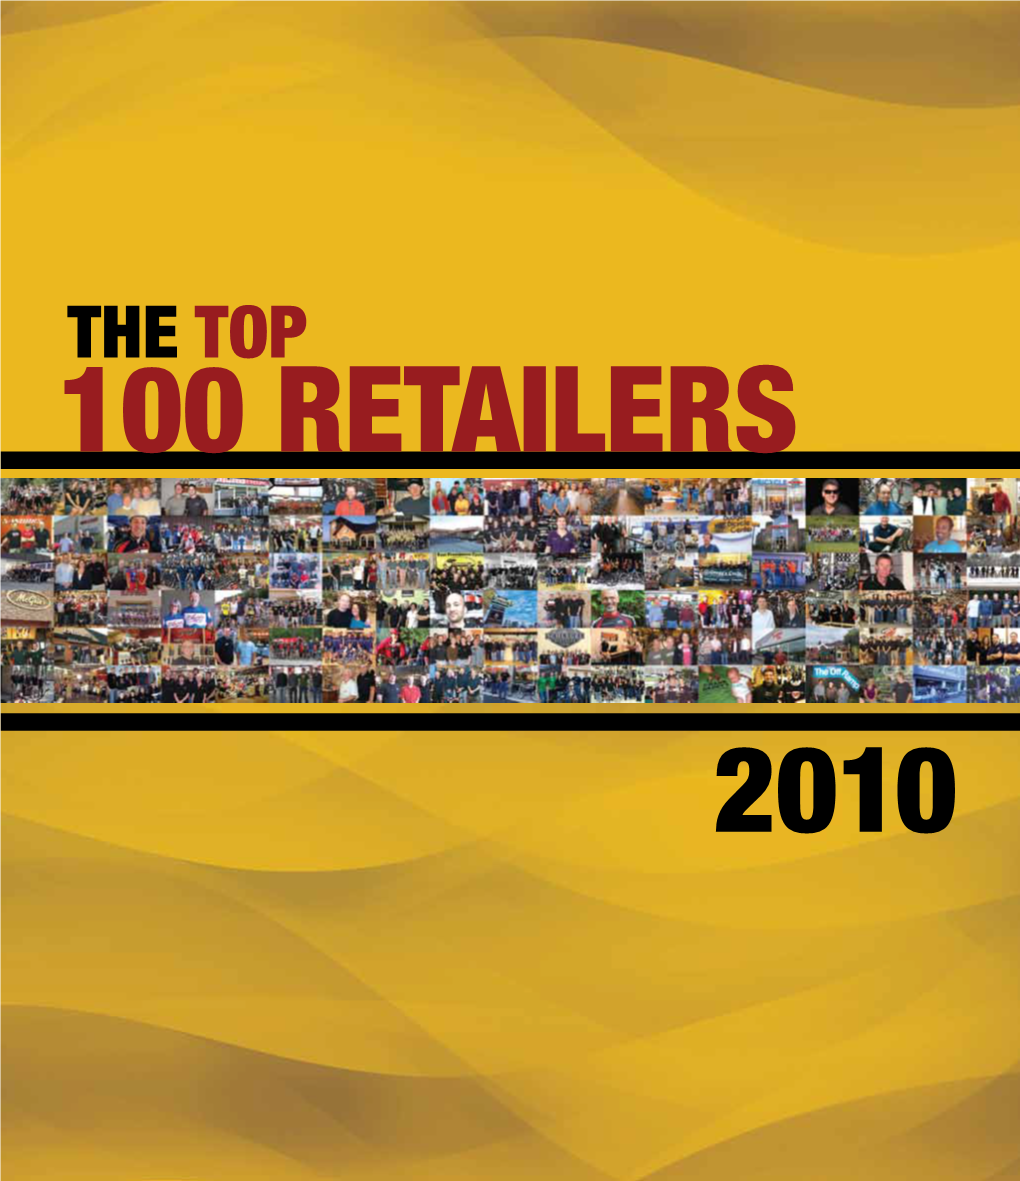 The Top 100 Retailers